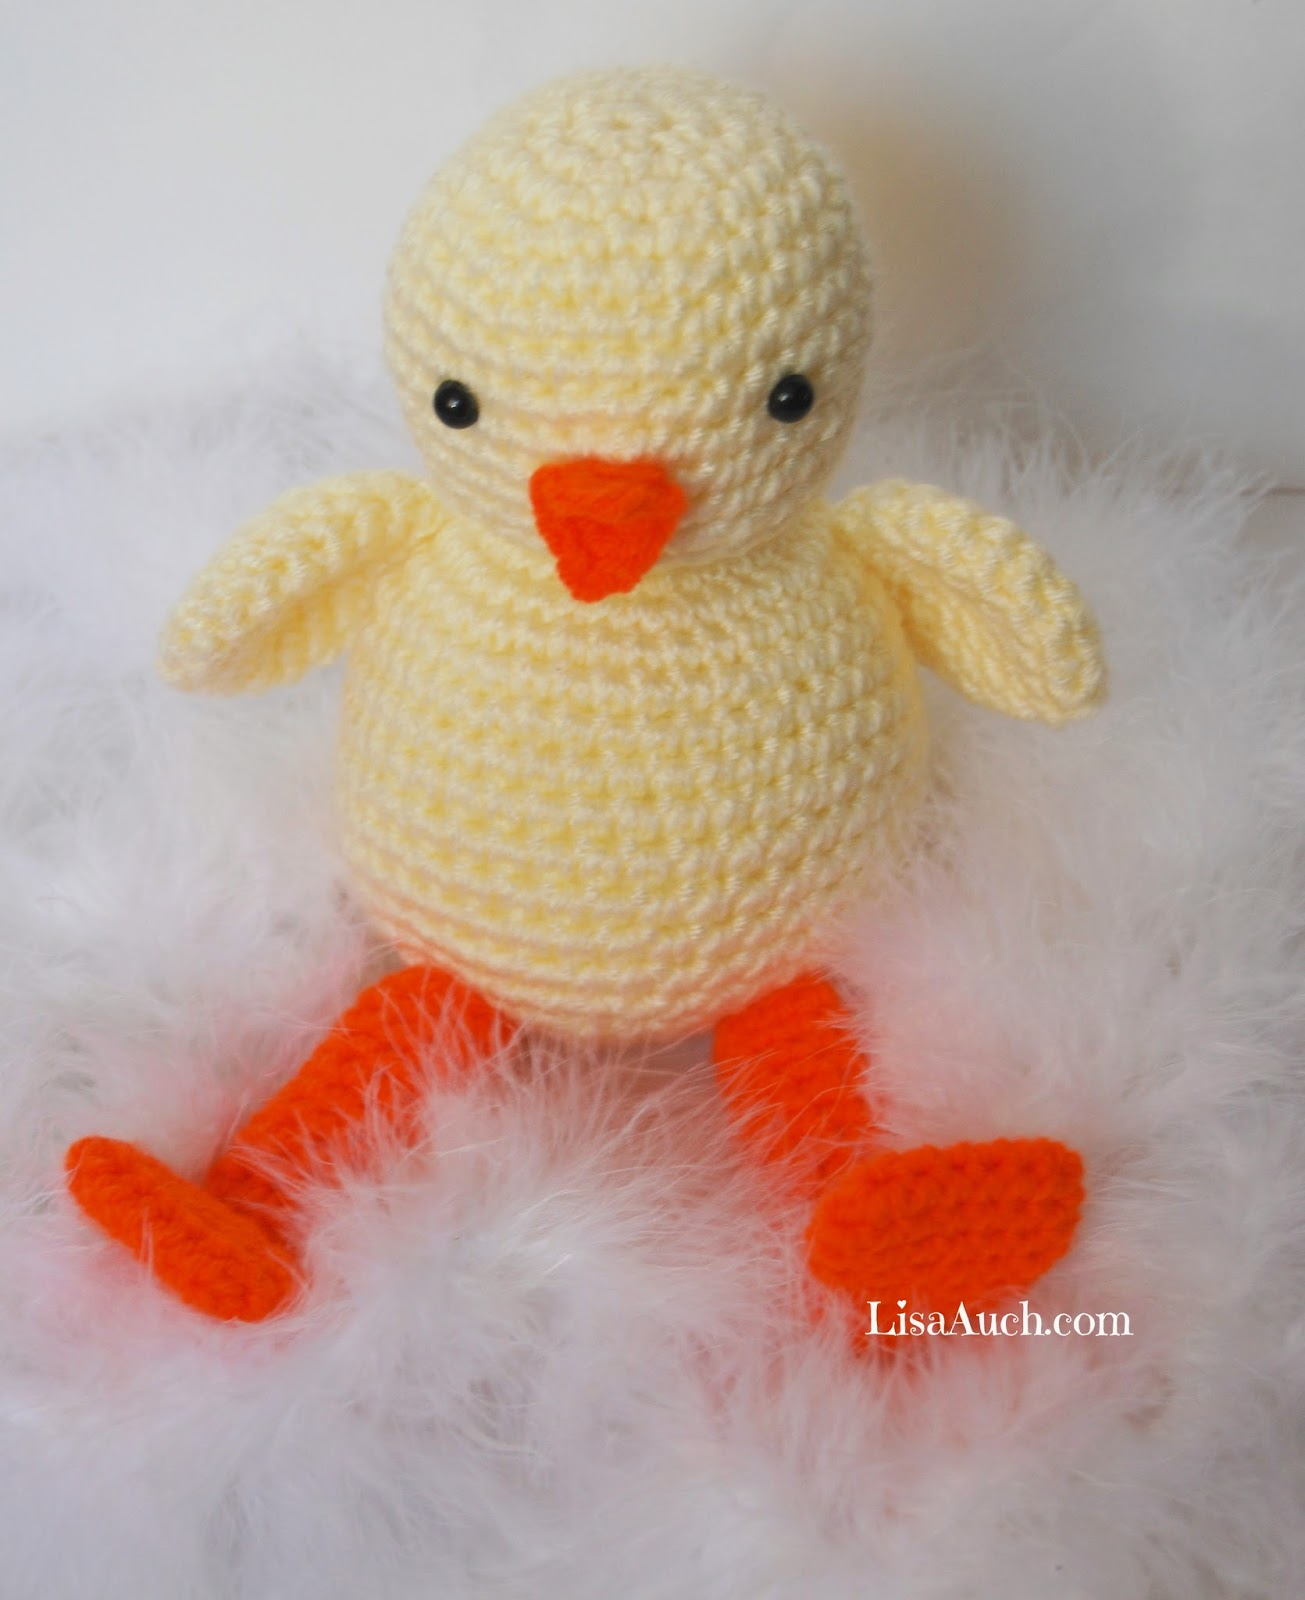 Free Easter Crochet Patterns Free Crochet Patterns And Designs Lisaauch Crochet Easter Chick